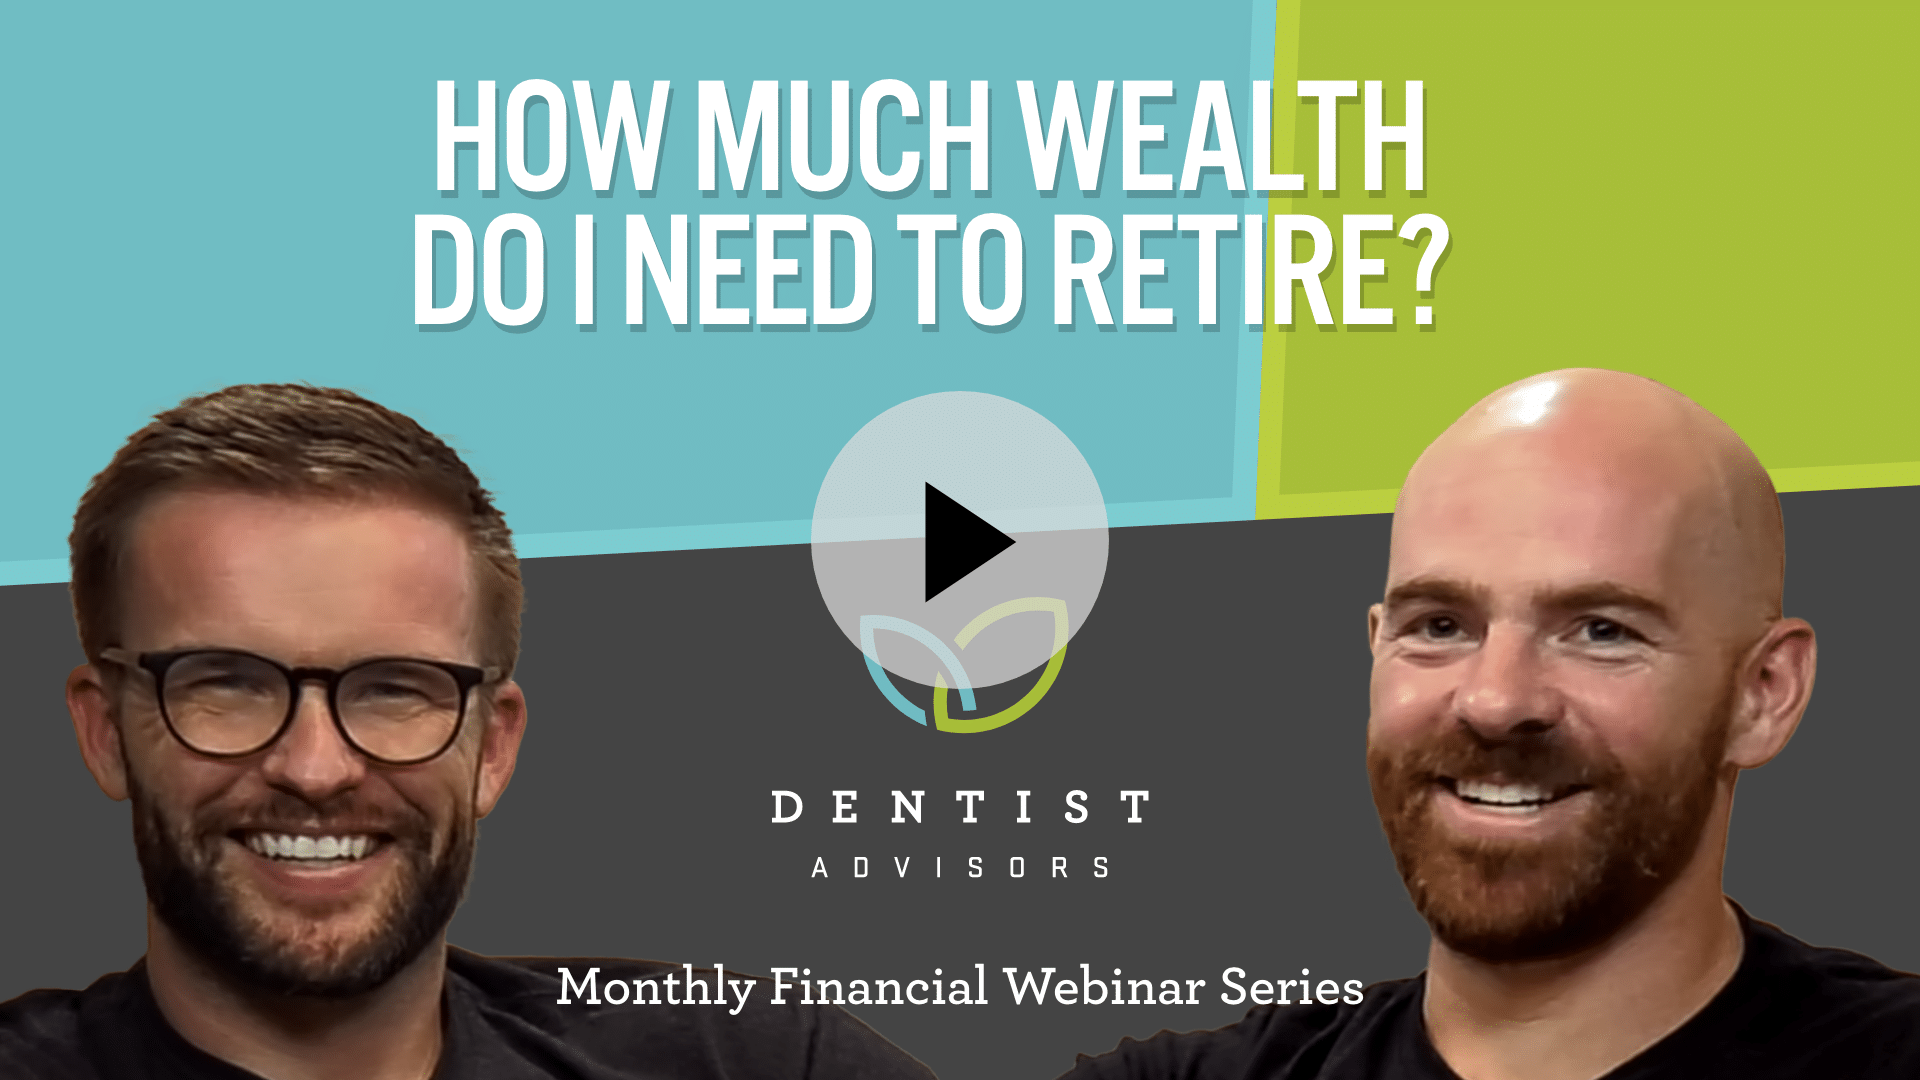 Webinar Video: How much wealth do I need to retire?